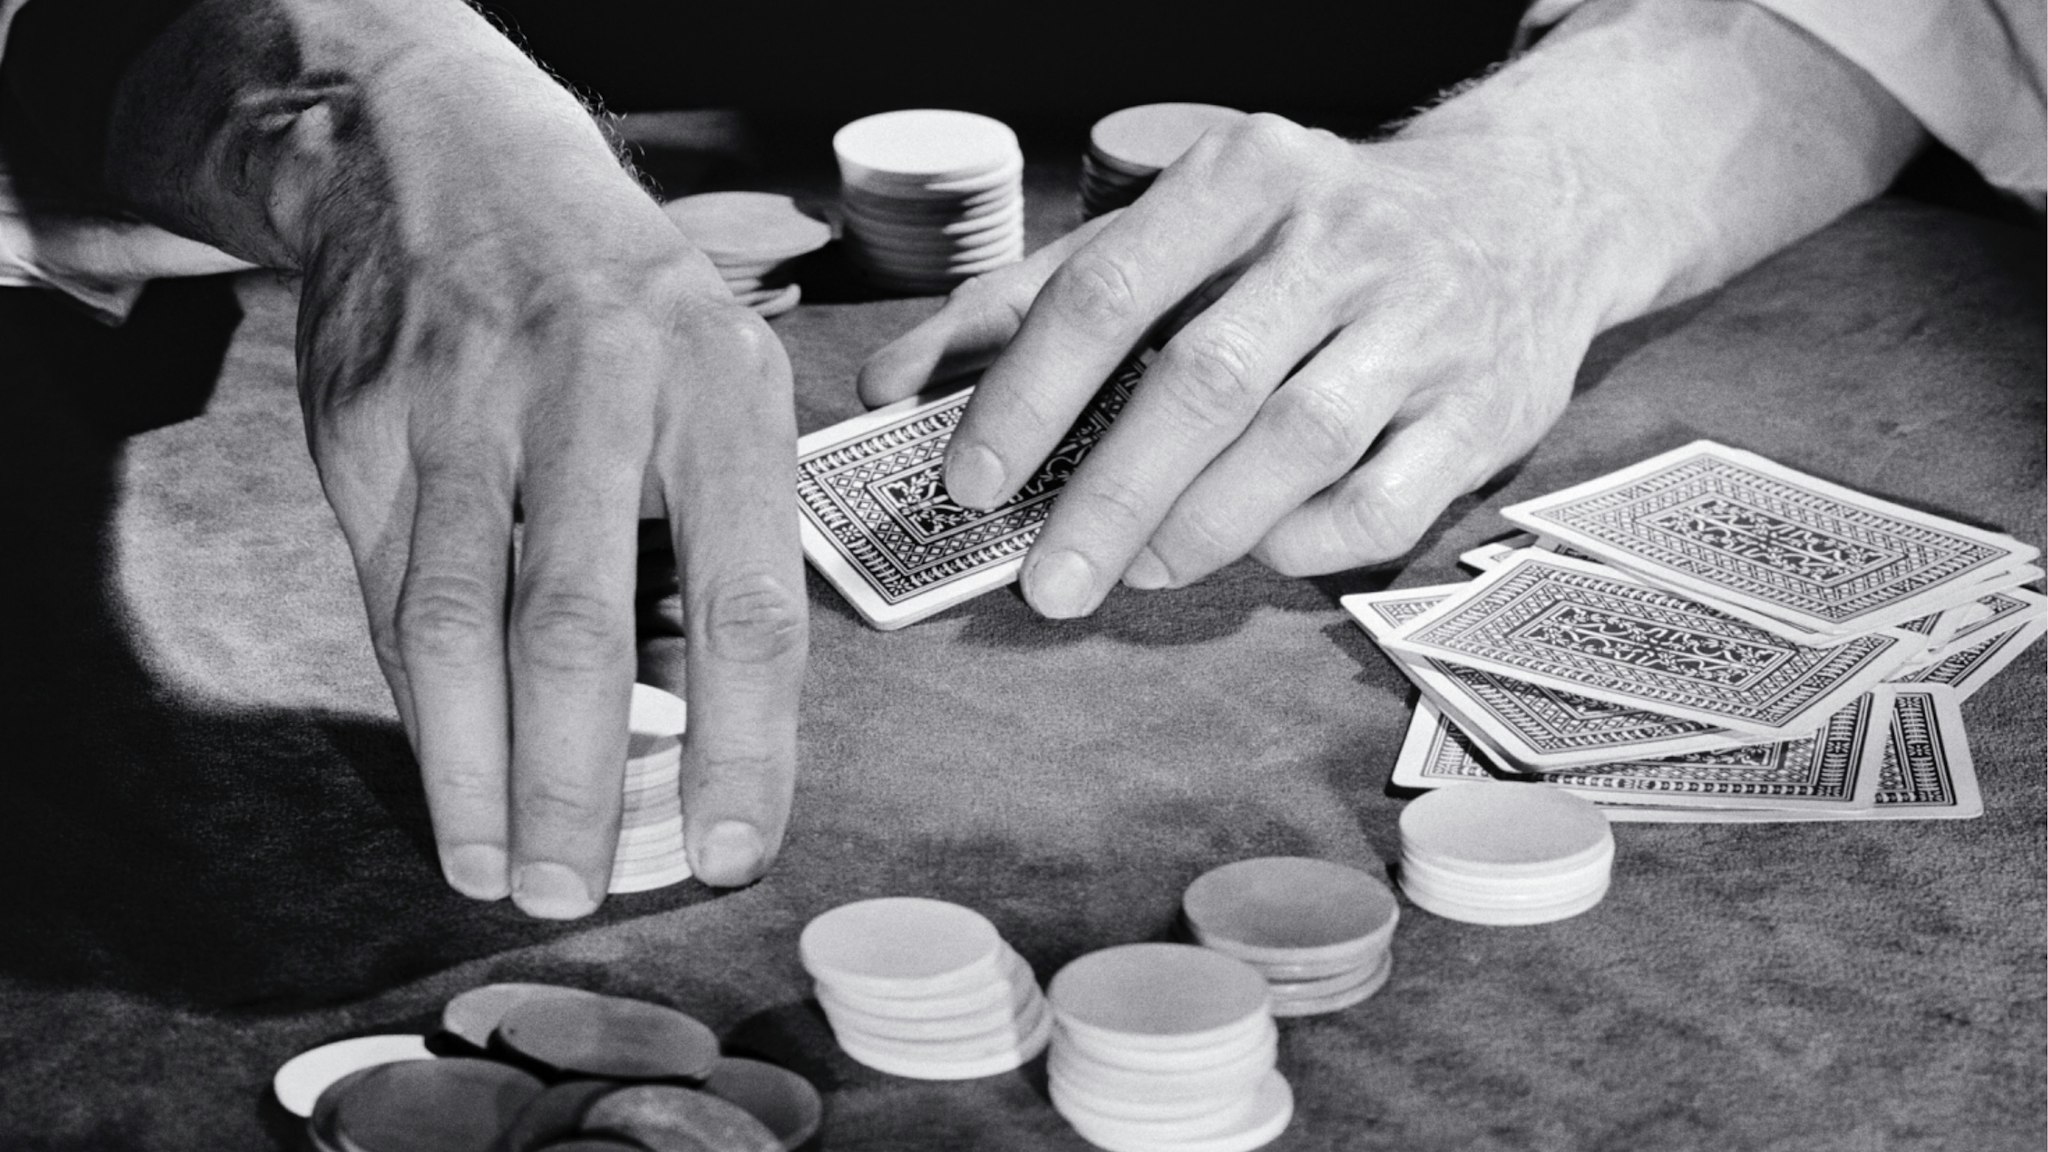 1930s 1940s 1950s Man Hands Gambler Playing Game Of Cards Sitting At Poker Table Holding Chips About To Place Bet.